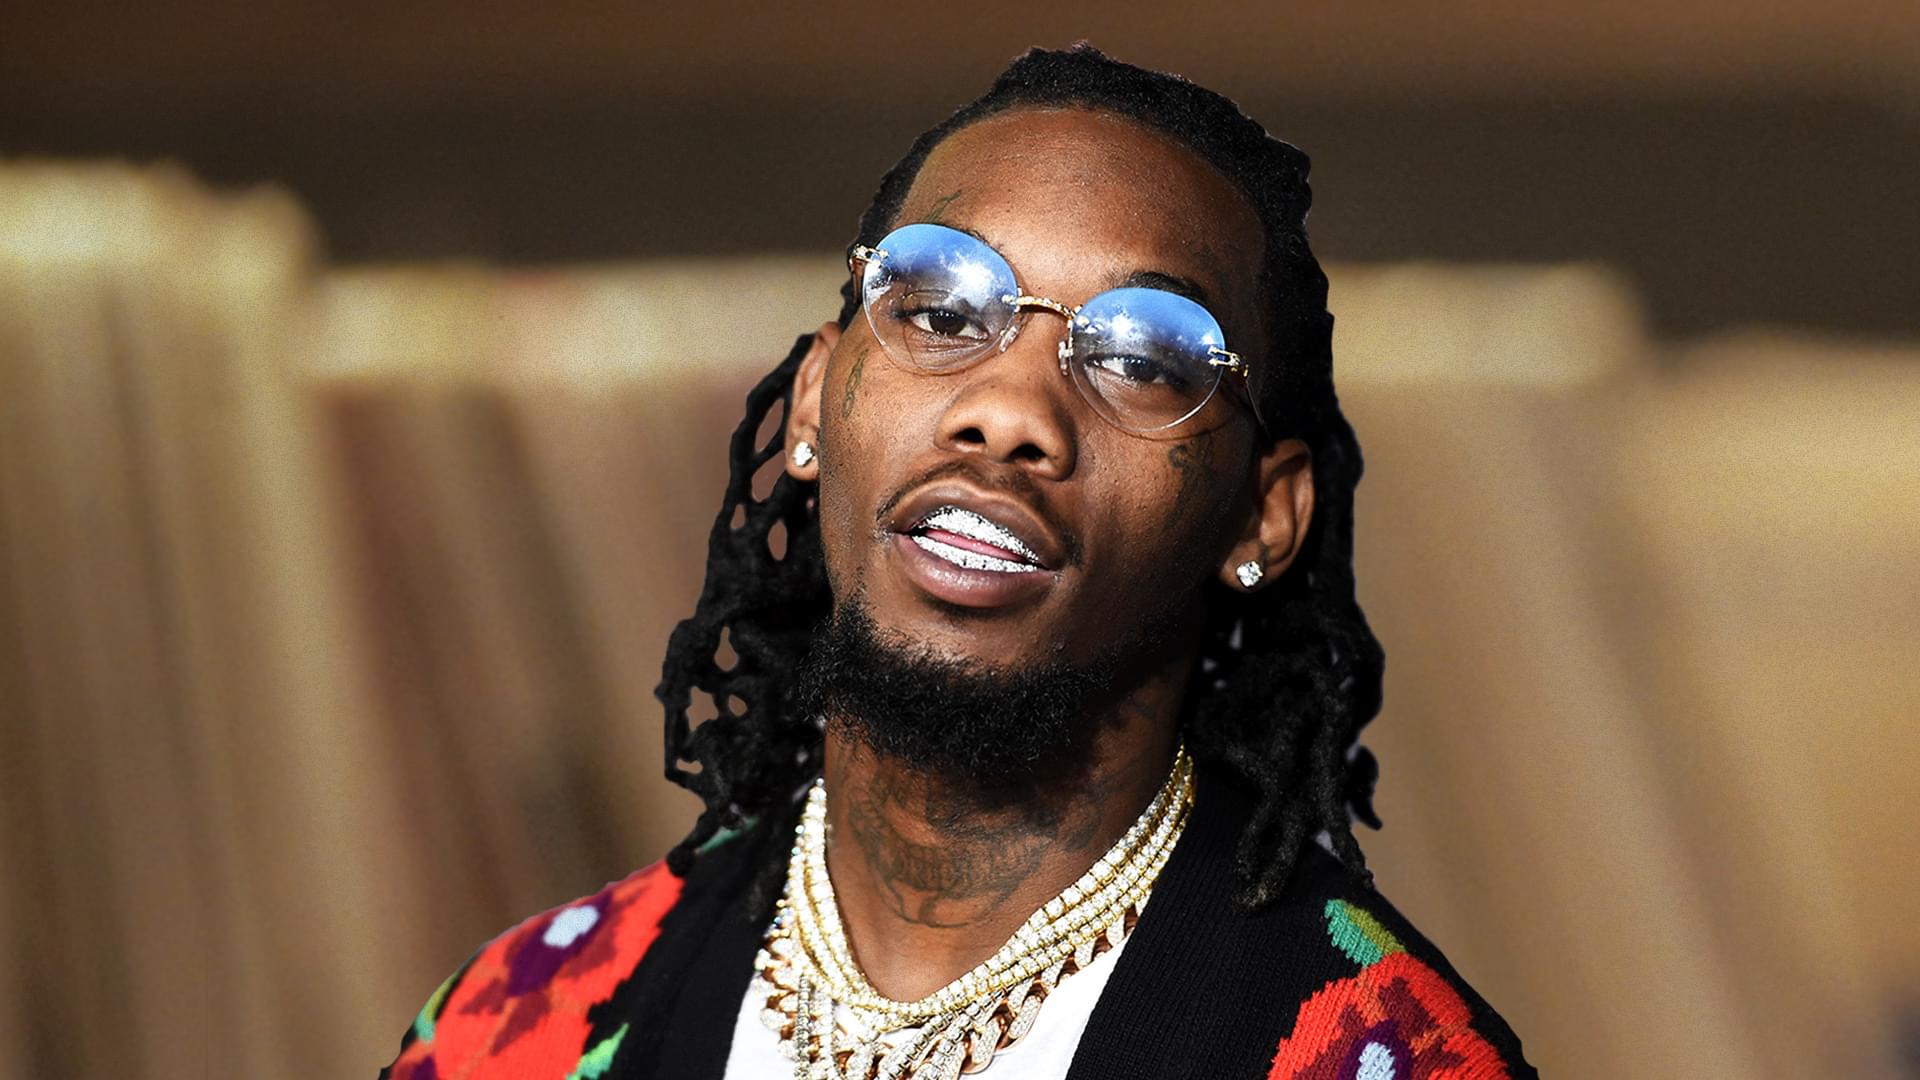 For The Record: Is Offset The Best Migos Member?